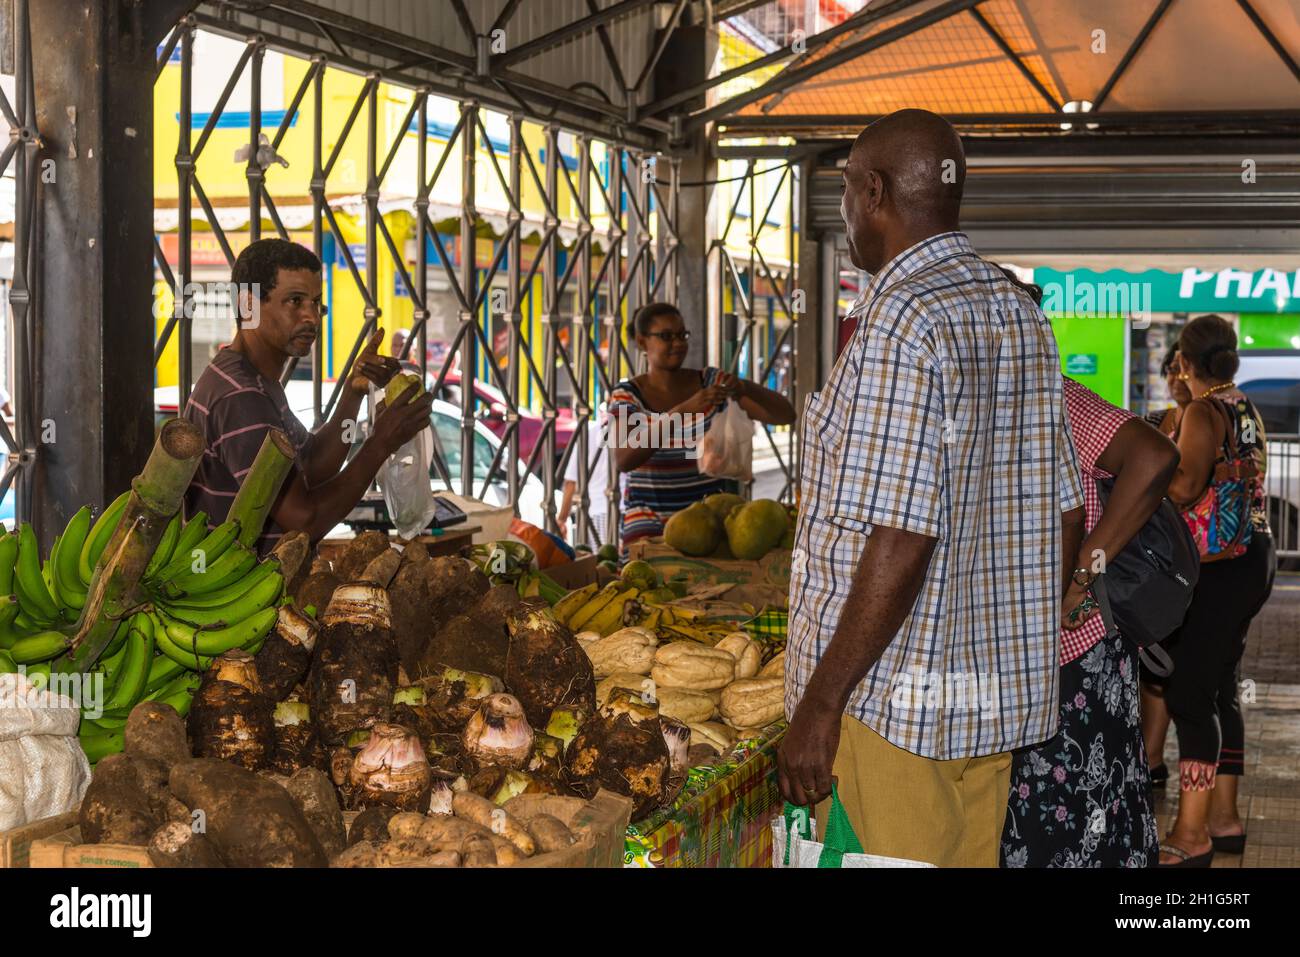 Fort-de-France, Martinique - December 19, 2016: Local man picks goods on the picturesque fruit and vegetable covered market of Fort de France, the cap Stock Photo